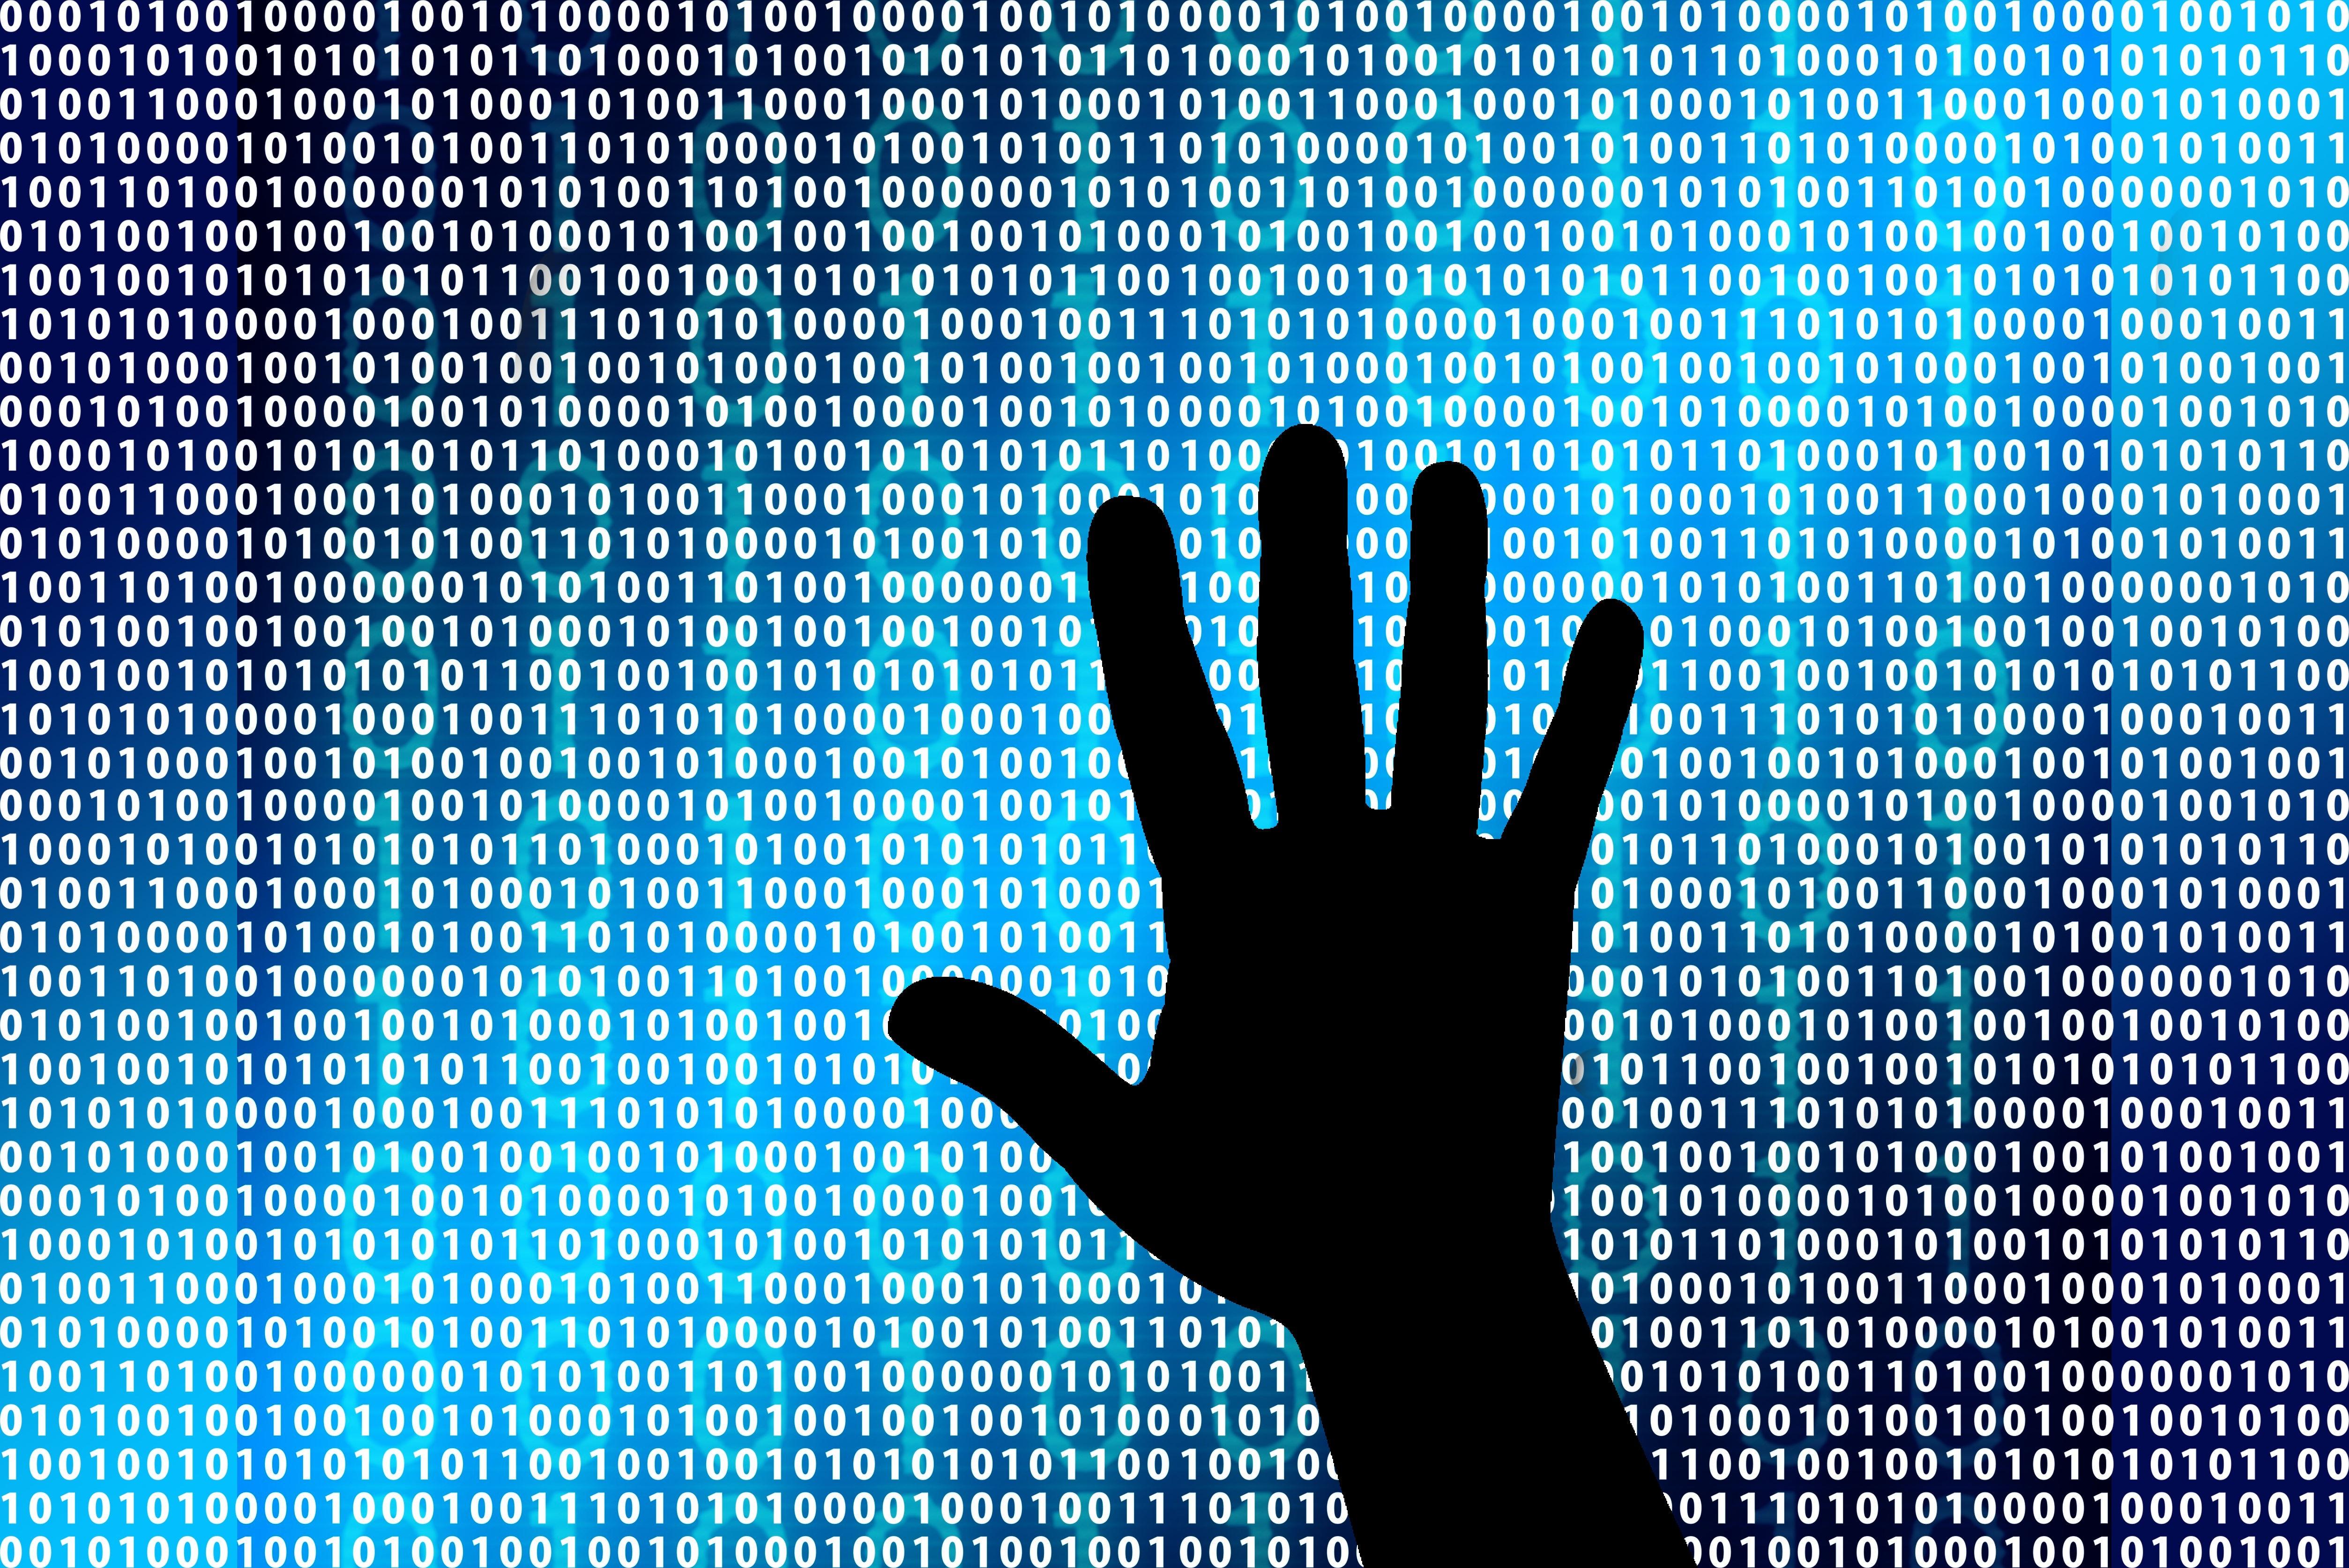 Binary Code, Binary Number, Hand, Silhouette - Cyber Security Banner Images Creative Commons , HD Wallpaper & Backgrounds